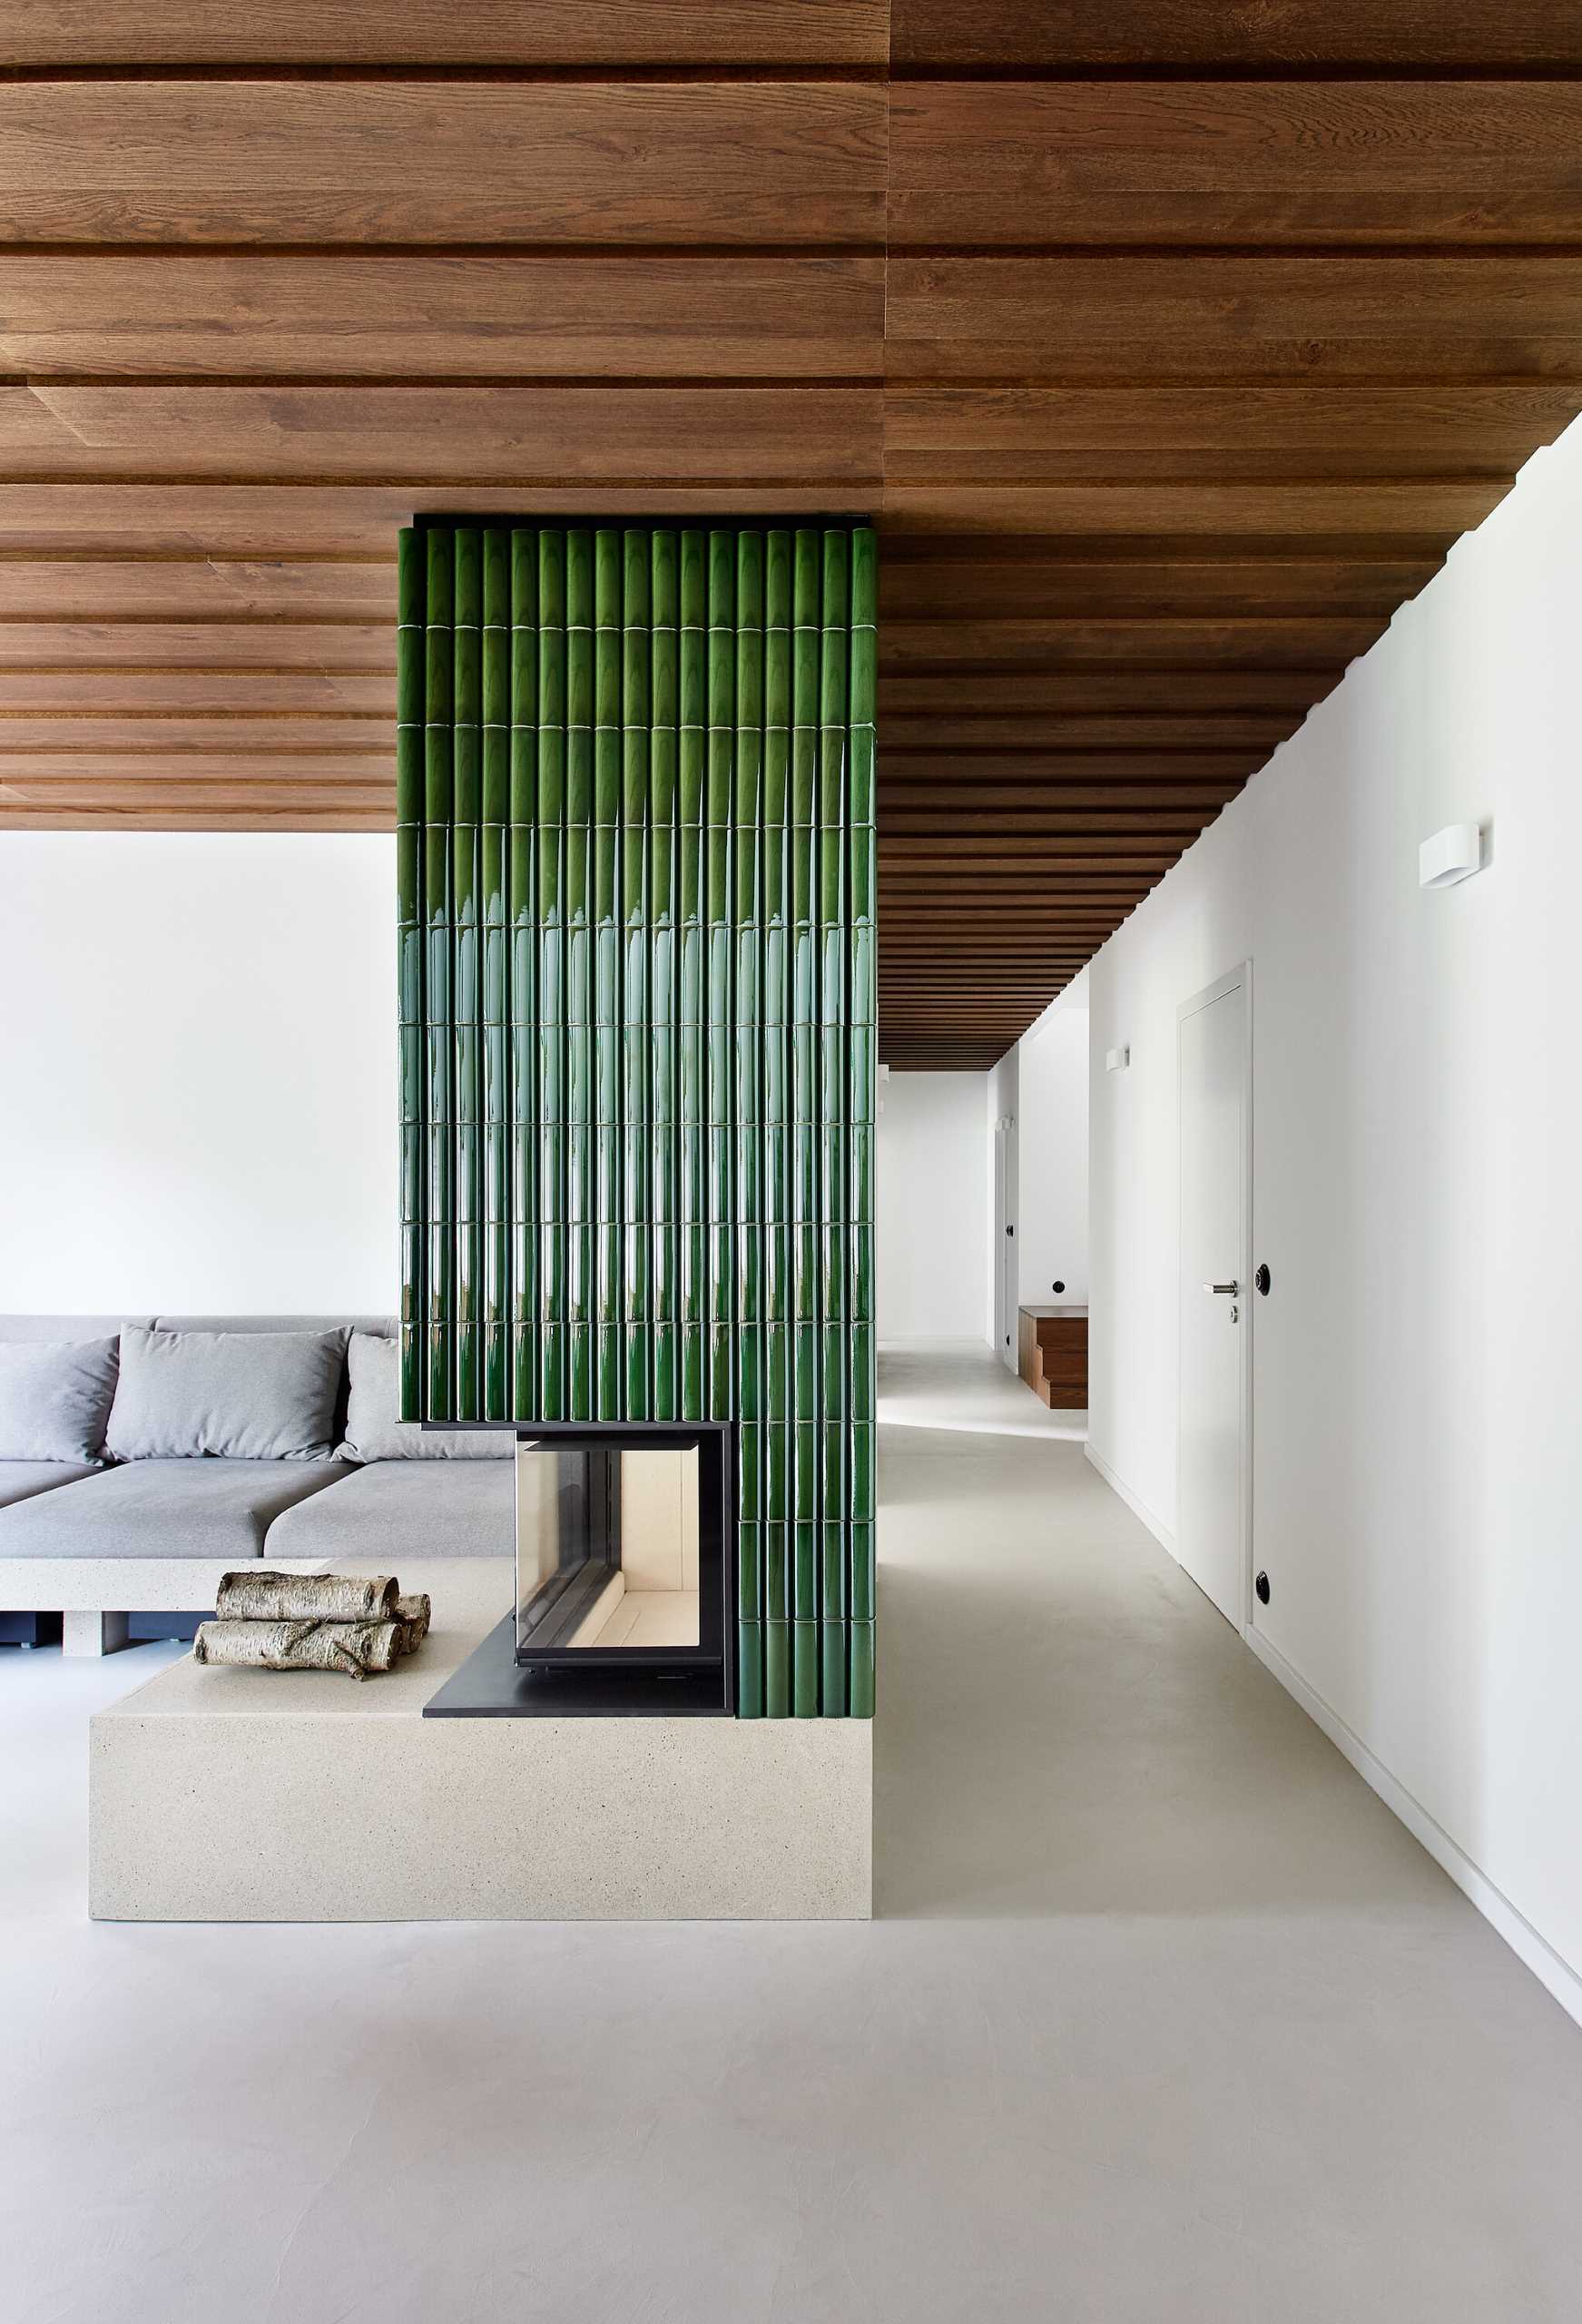 Located between the living room, with its built-in couch, and the hallway, the green tiles of the fireplace are handmade ceramic tiles that have a rounded design to them.